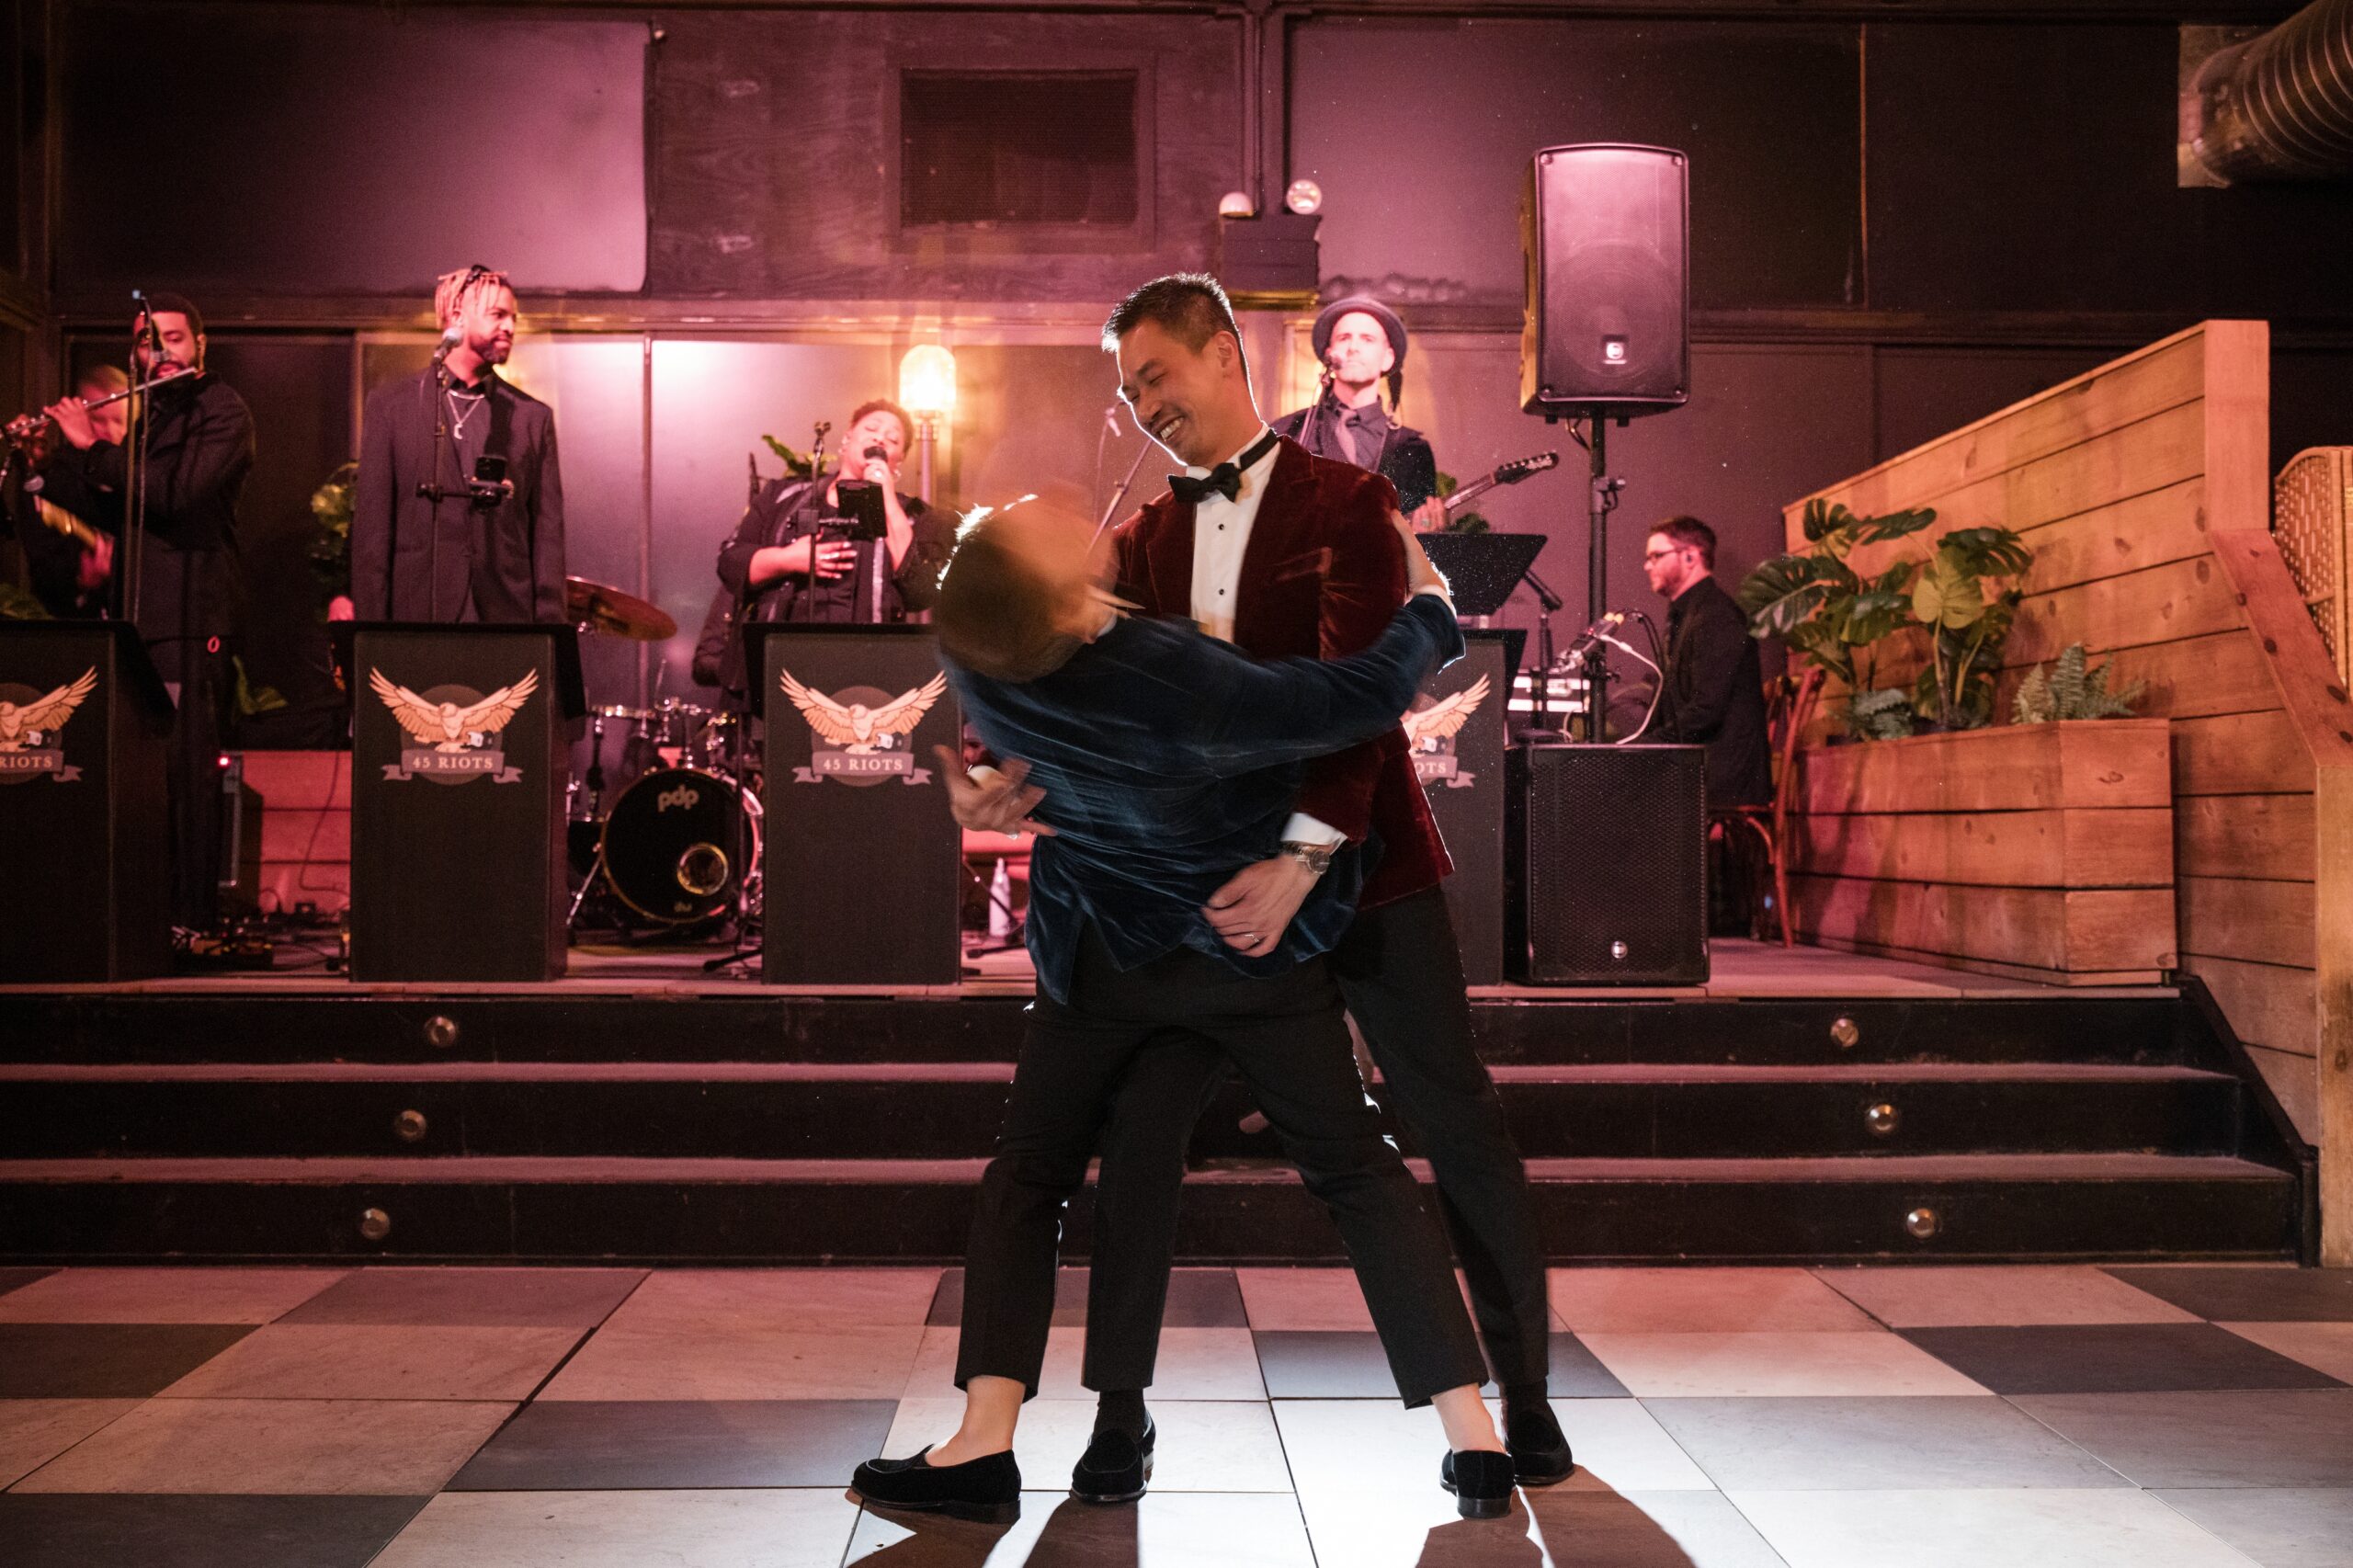 Two grooms dance together on a stage, with one dipping the other dramatically, as a live band performs in the background at their 74 Wythe wedding.